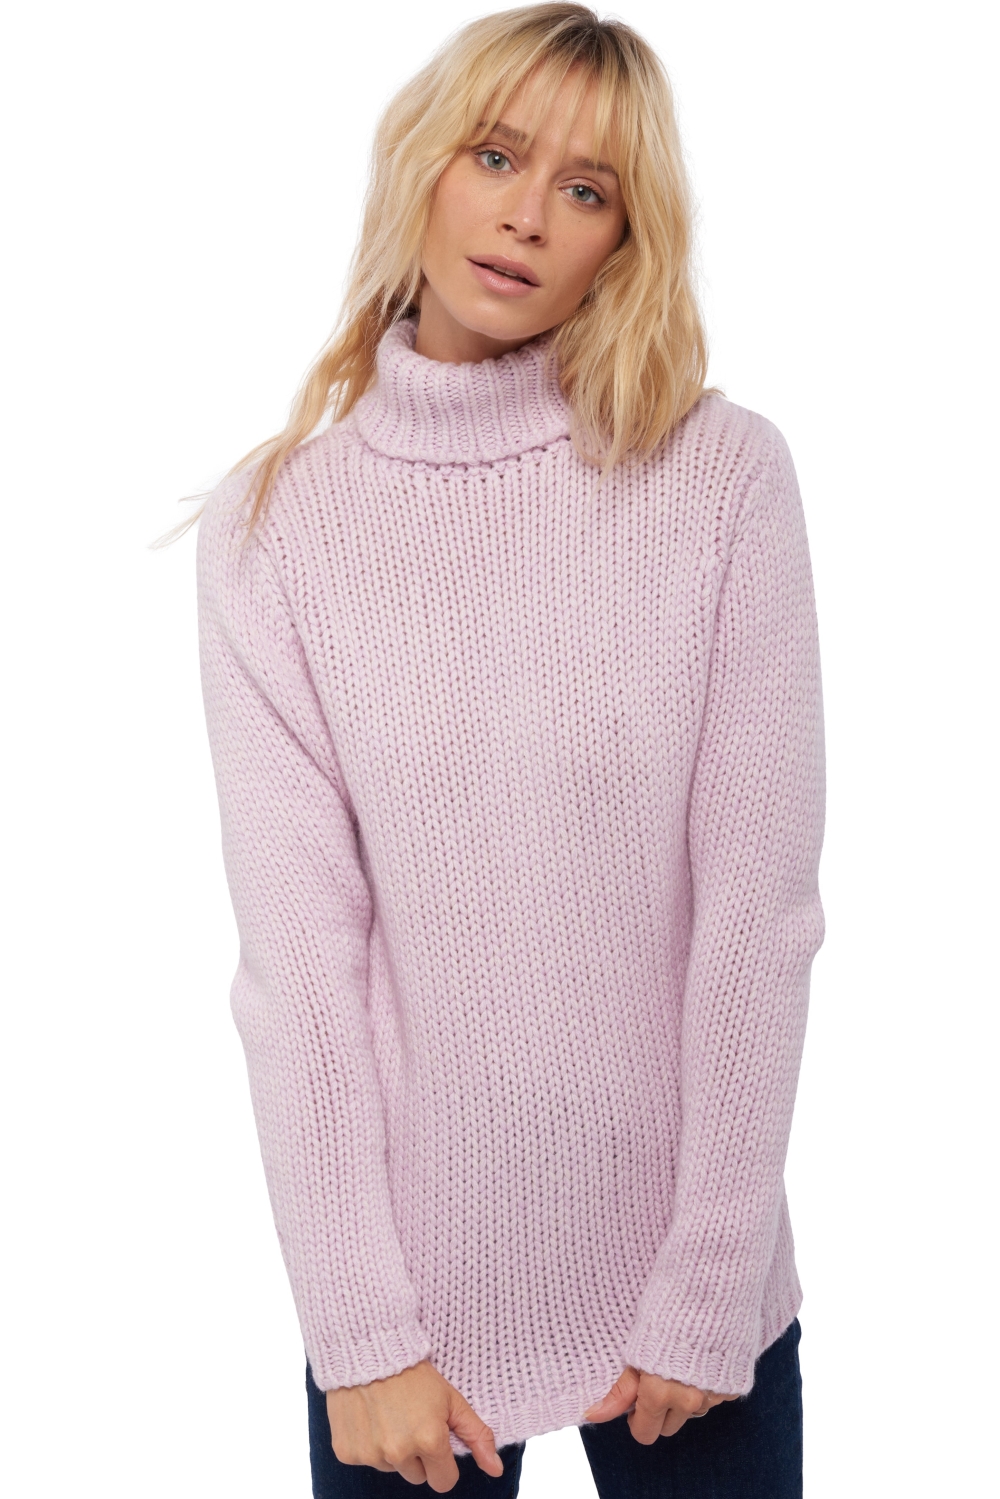 Cashmere ladies chunky sweater vicenza lilas shinking violet l